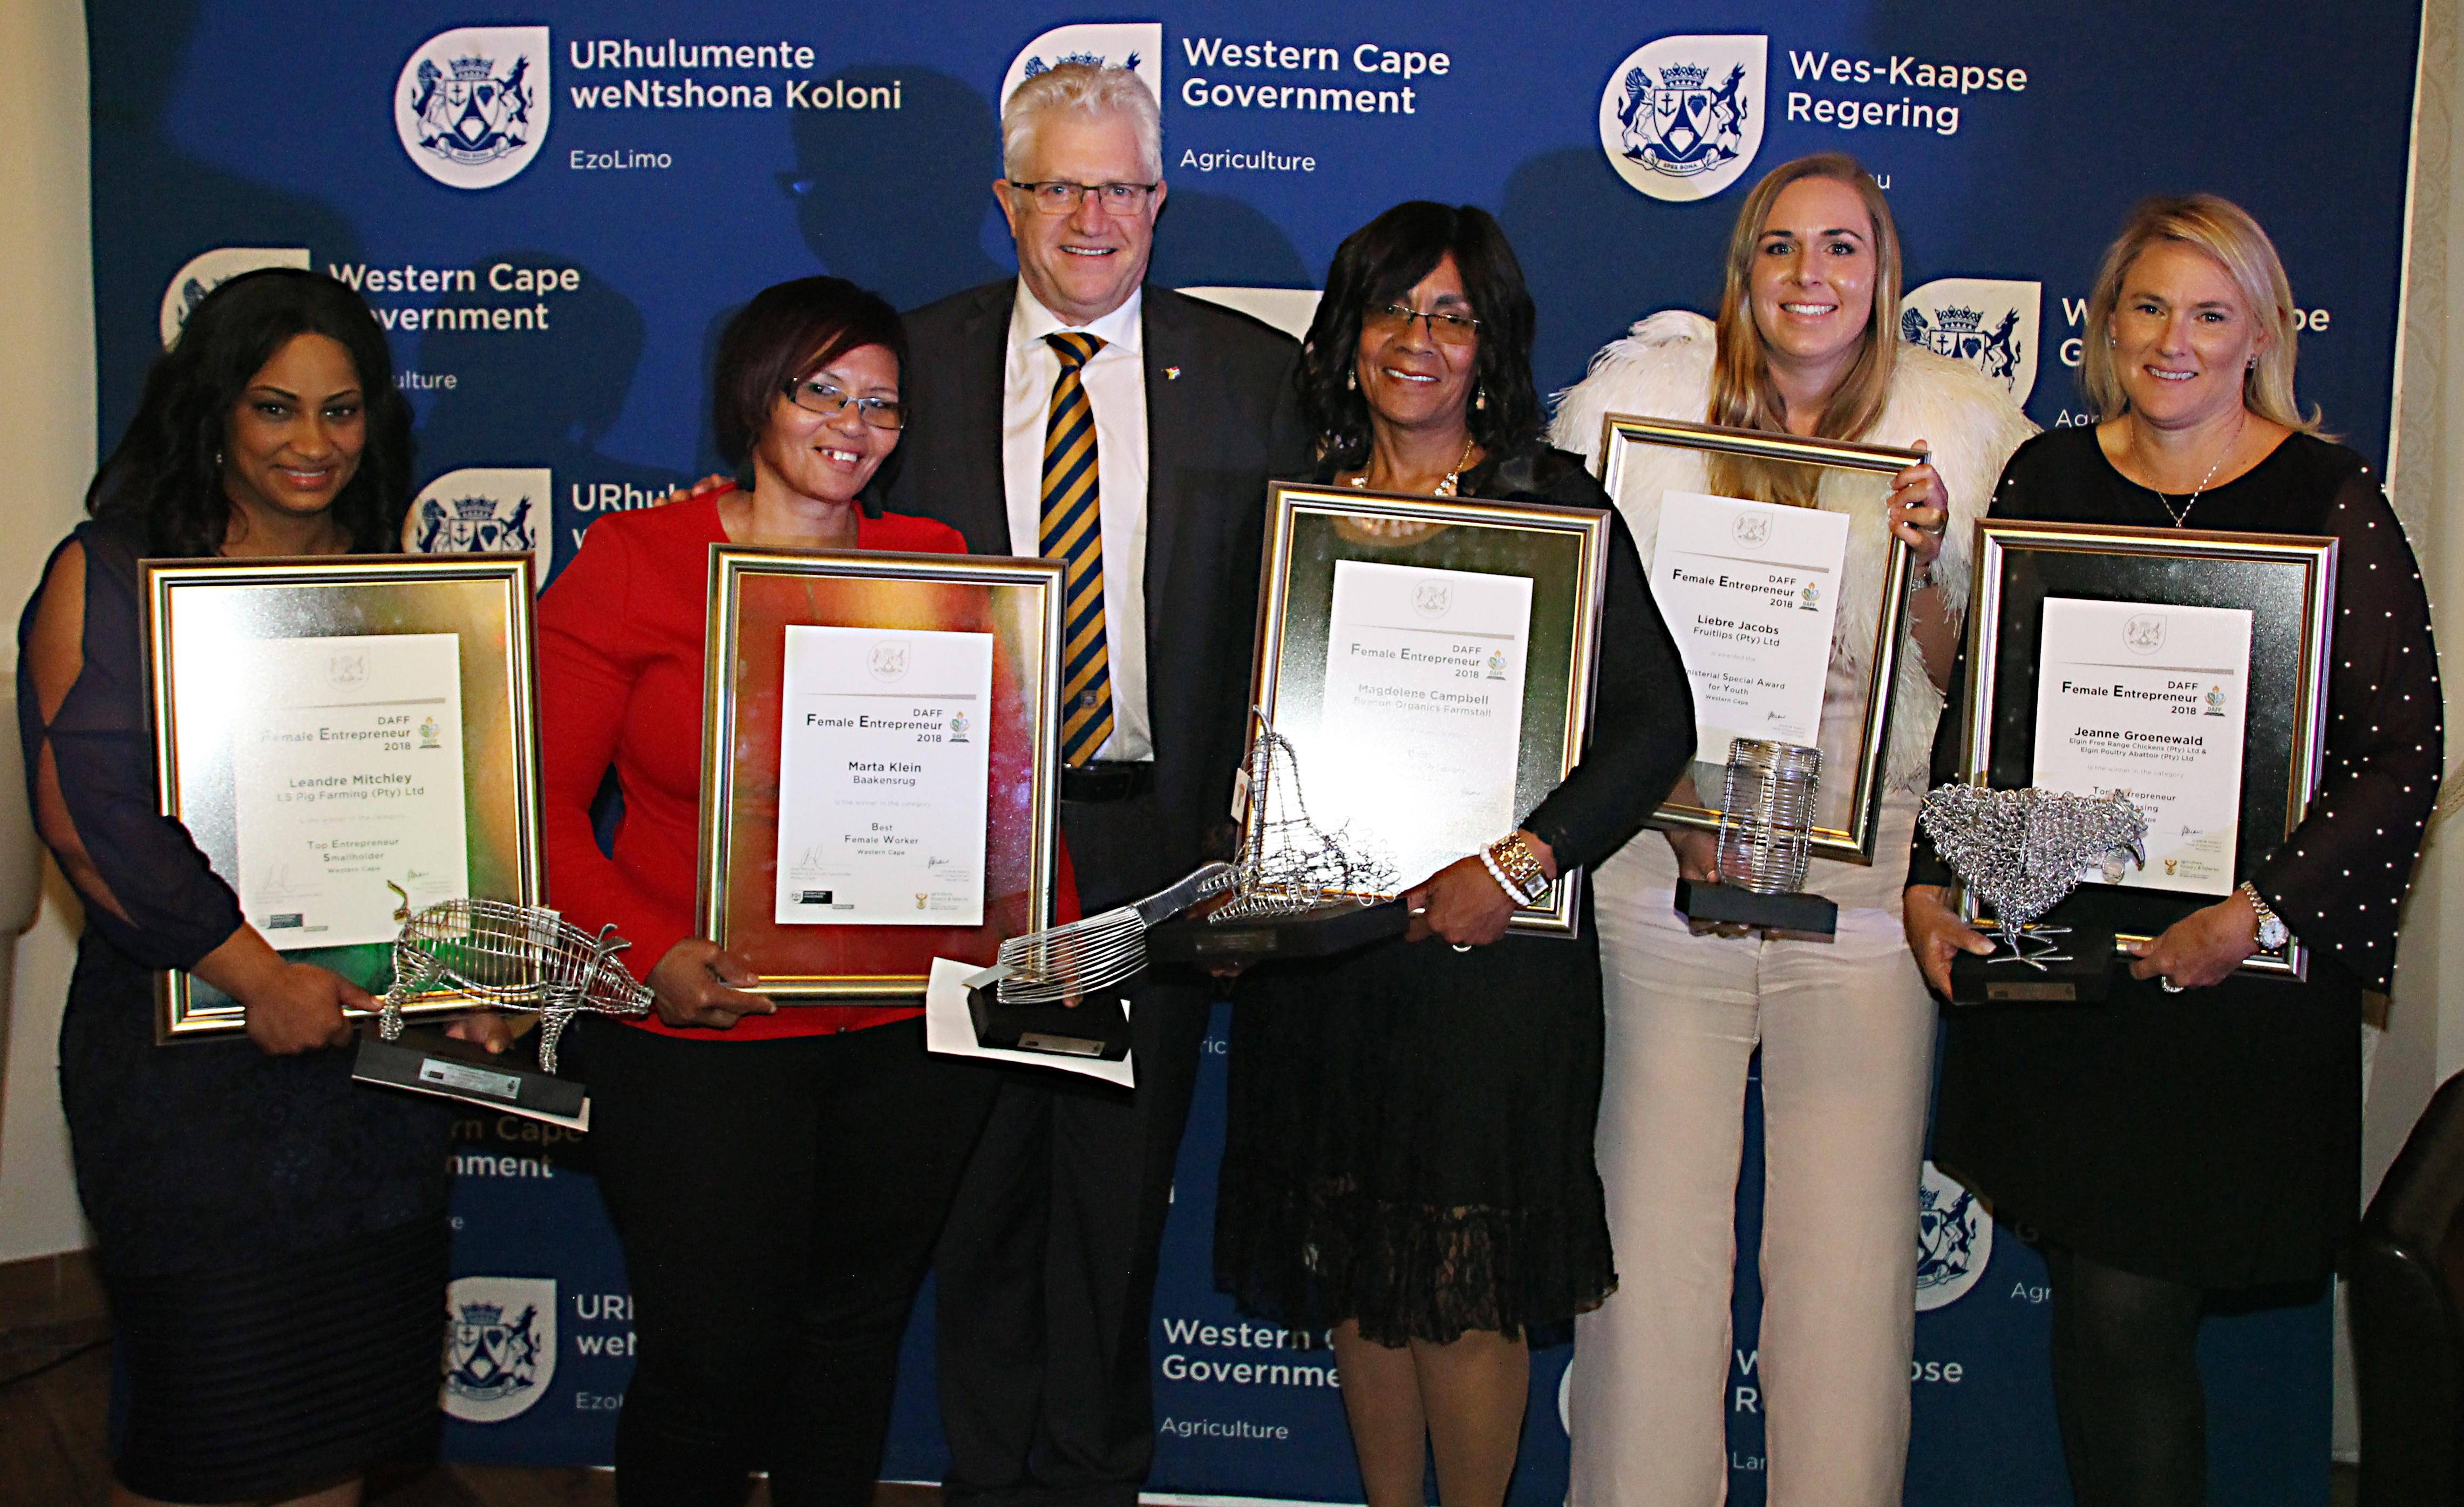 Minister Alan Winde with the award winners